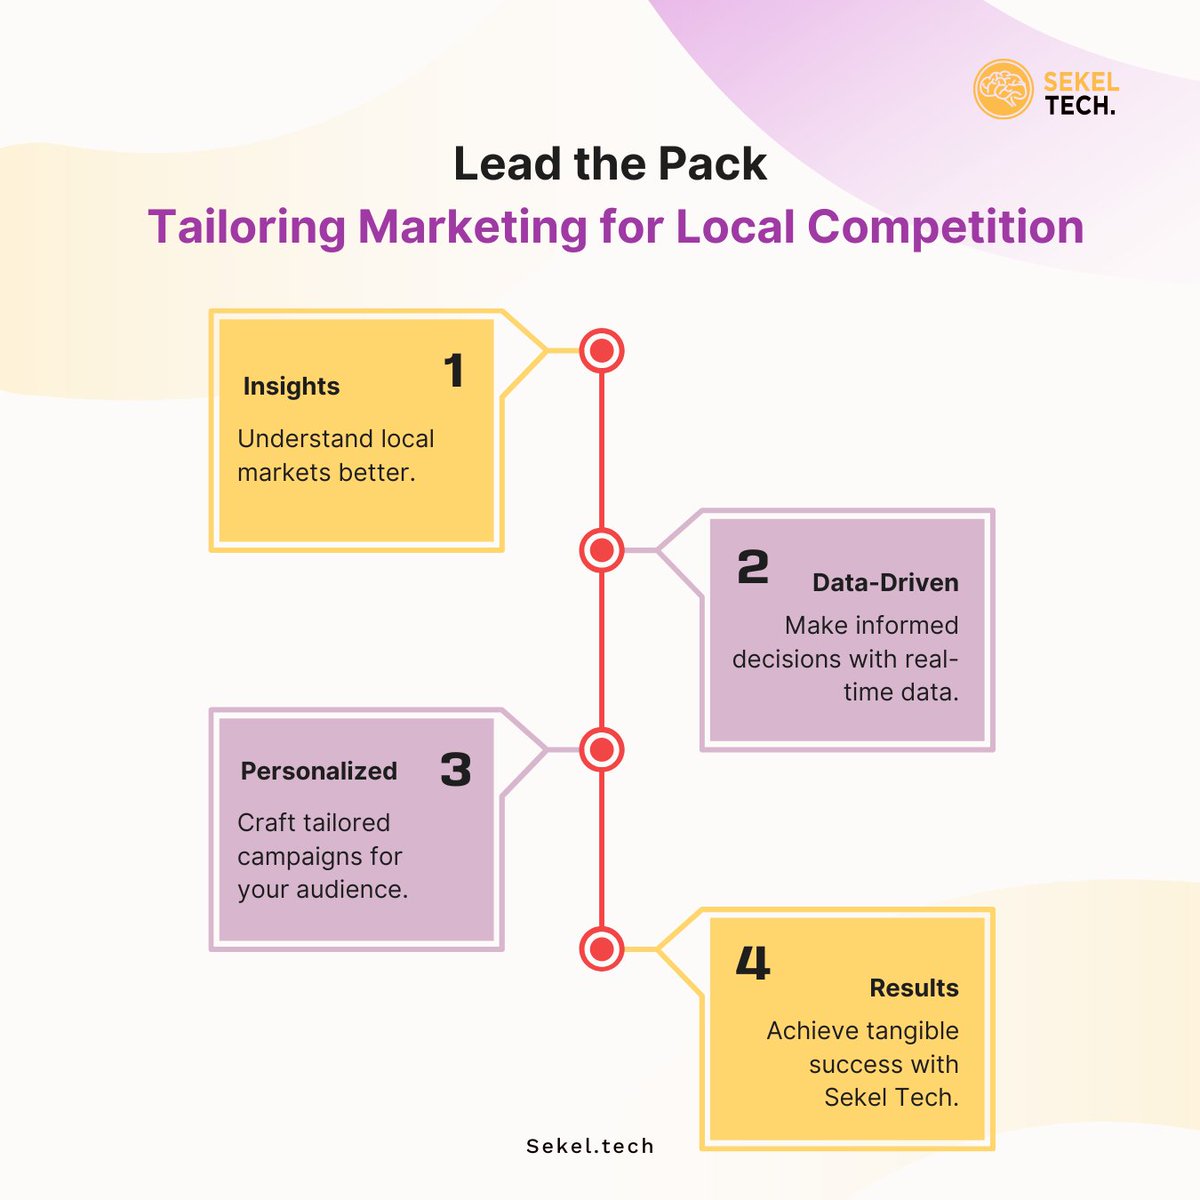 Stand out in the local arena with tailored marketing strategies powered by Sekel Tech. From personalized messaging to hyperlocal targeting, Sekel Tech empowers businesses to lead the pack in their local markets.

#tailoredmarketing #personalisedmarketingcampaign #sekeltech